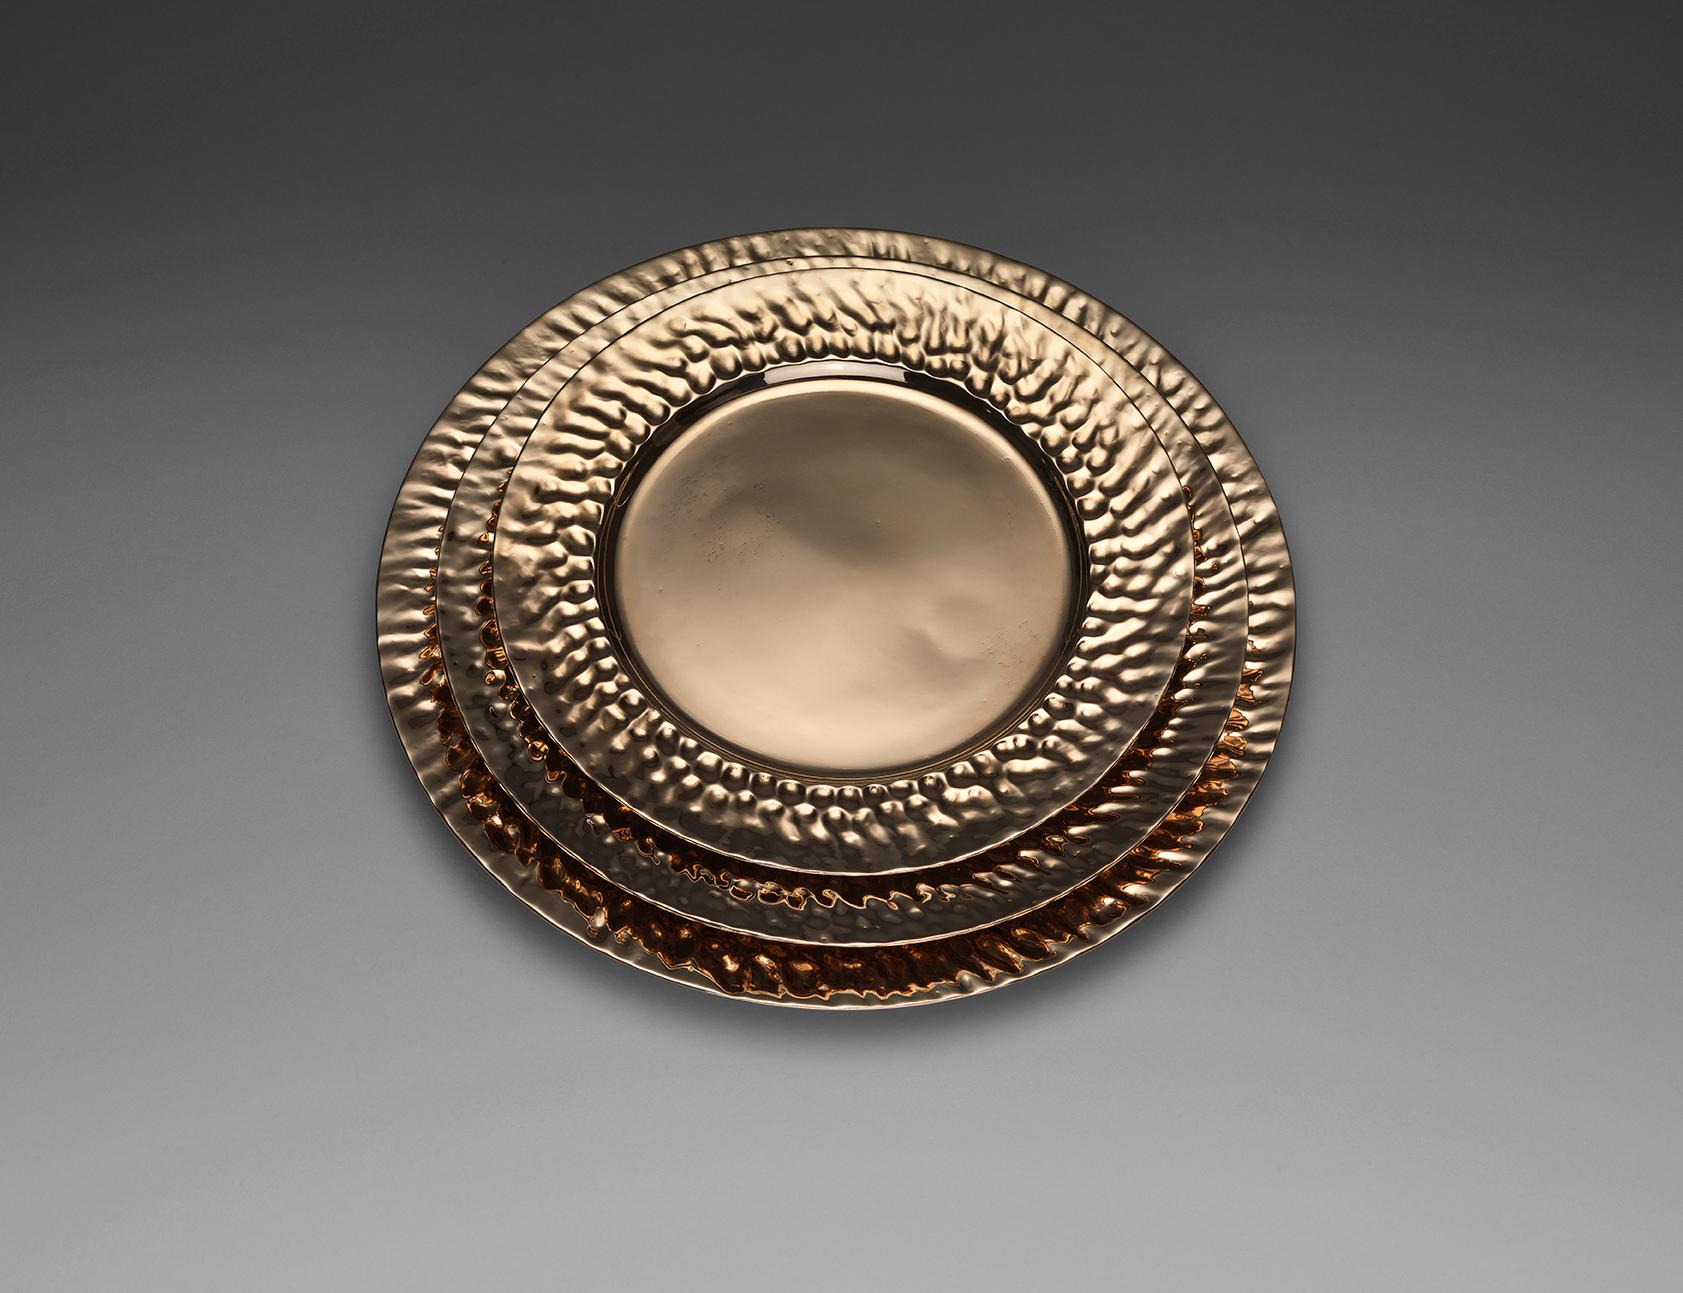 A bronze side plate with sculptural lip. Cast by lost wax technique. The plate can be used functionally or decoratively. Great care has been taken with the weight and thickness. They are as thin as porcelain and the weight is satisfying but not too